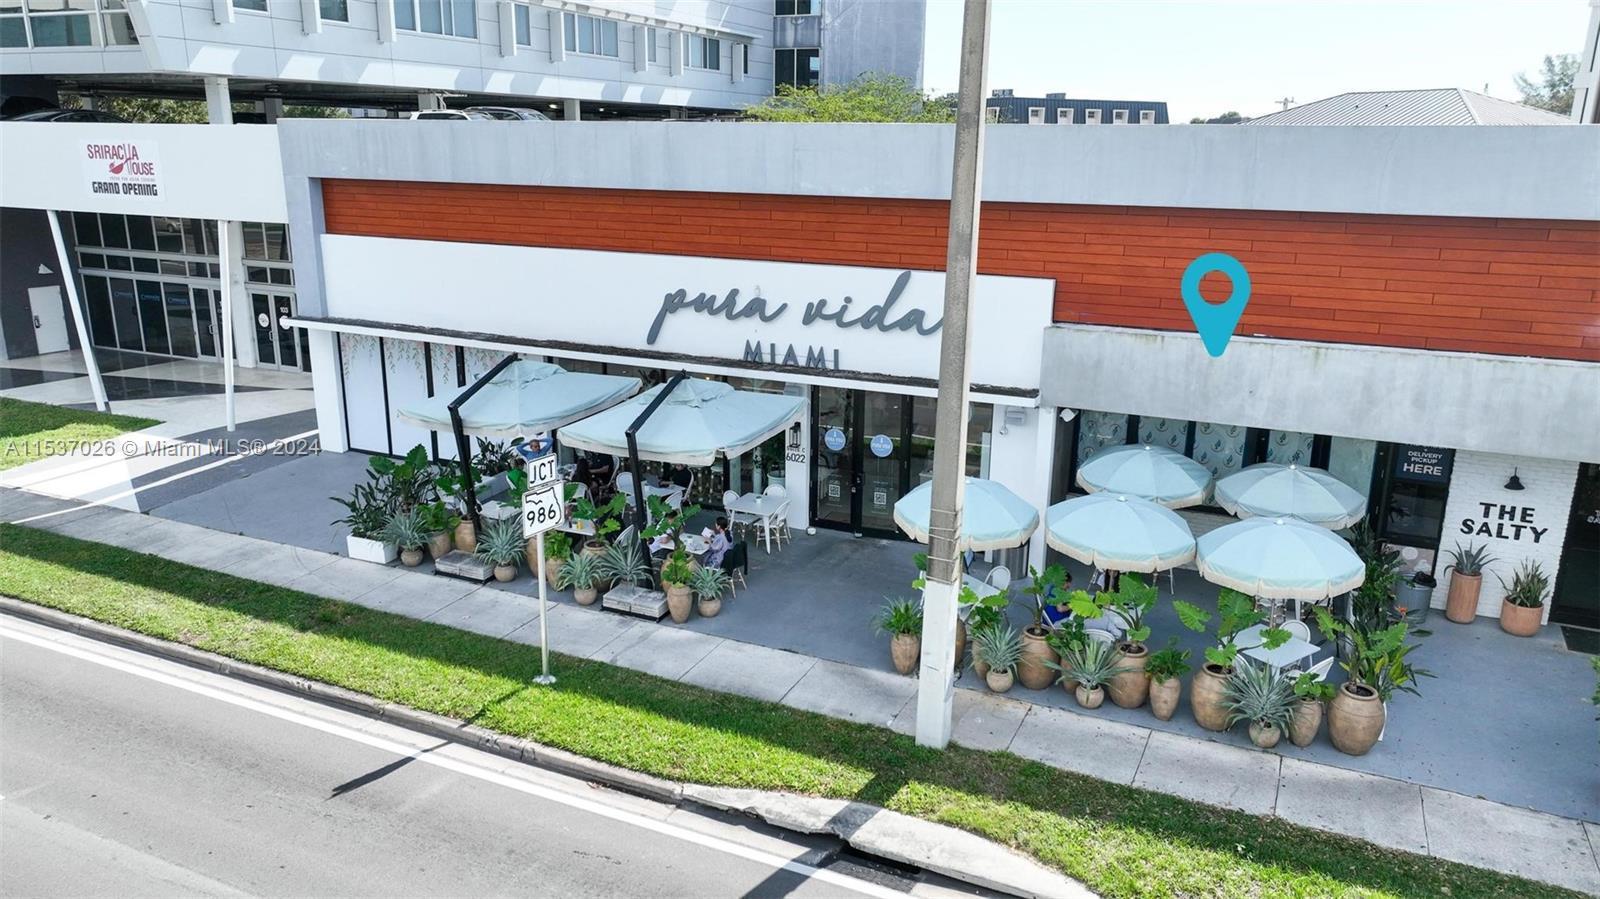 Photo of 6022 S Dixie Hwy in South Miami, FL